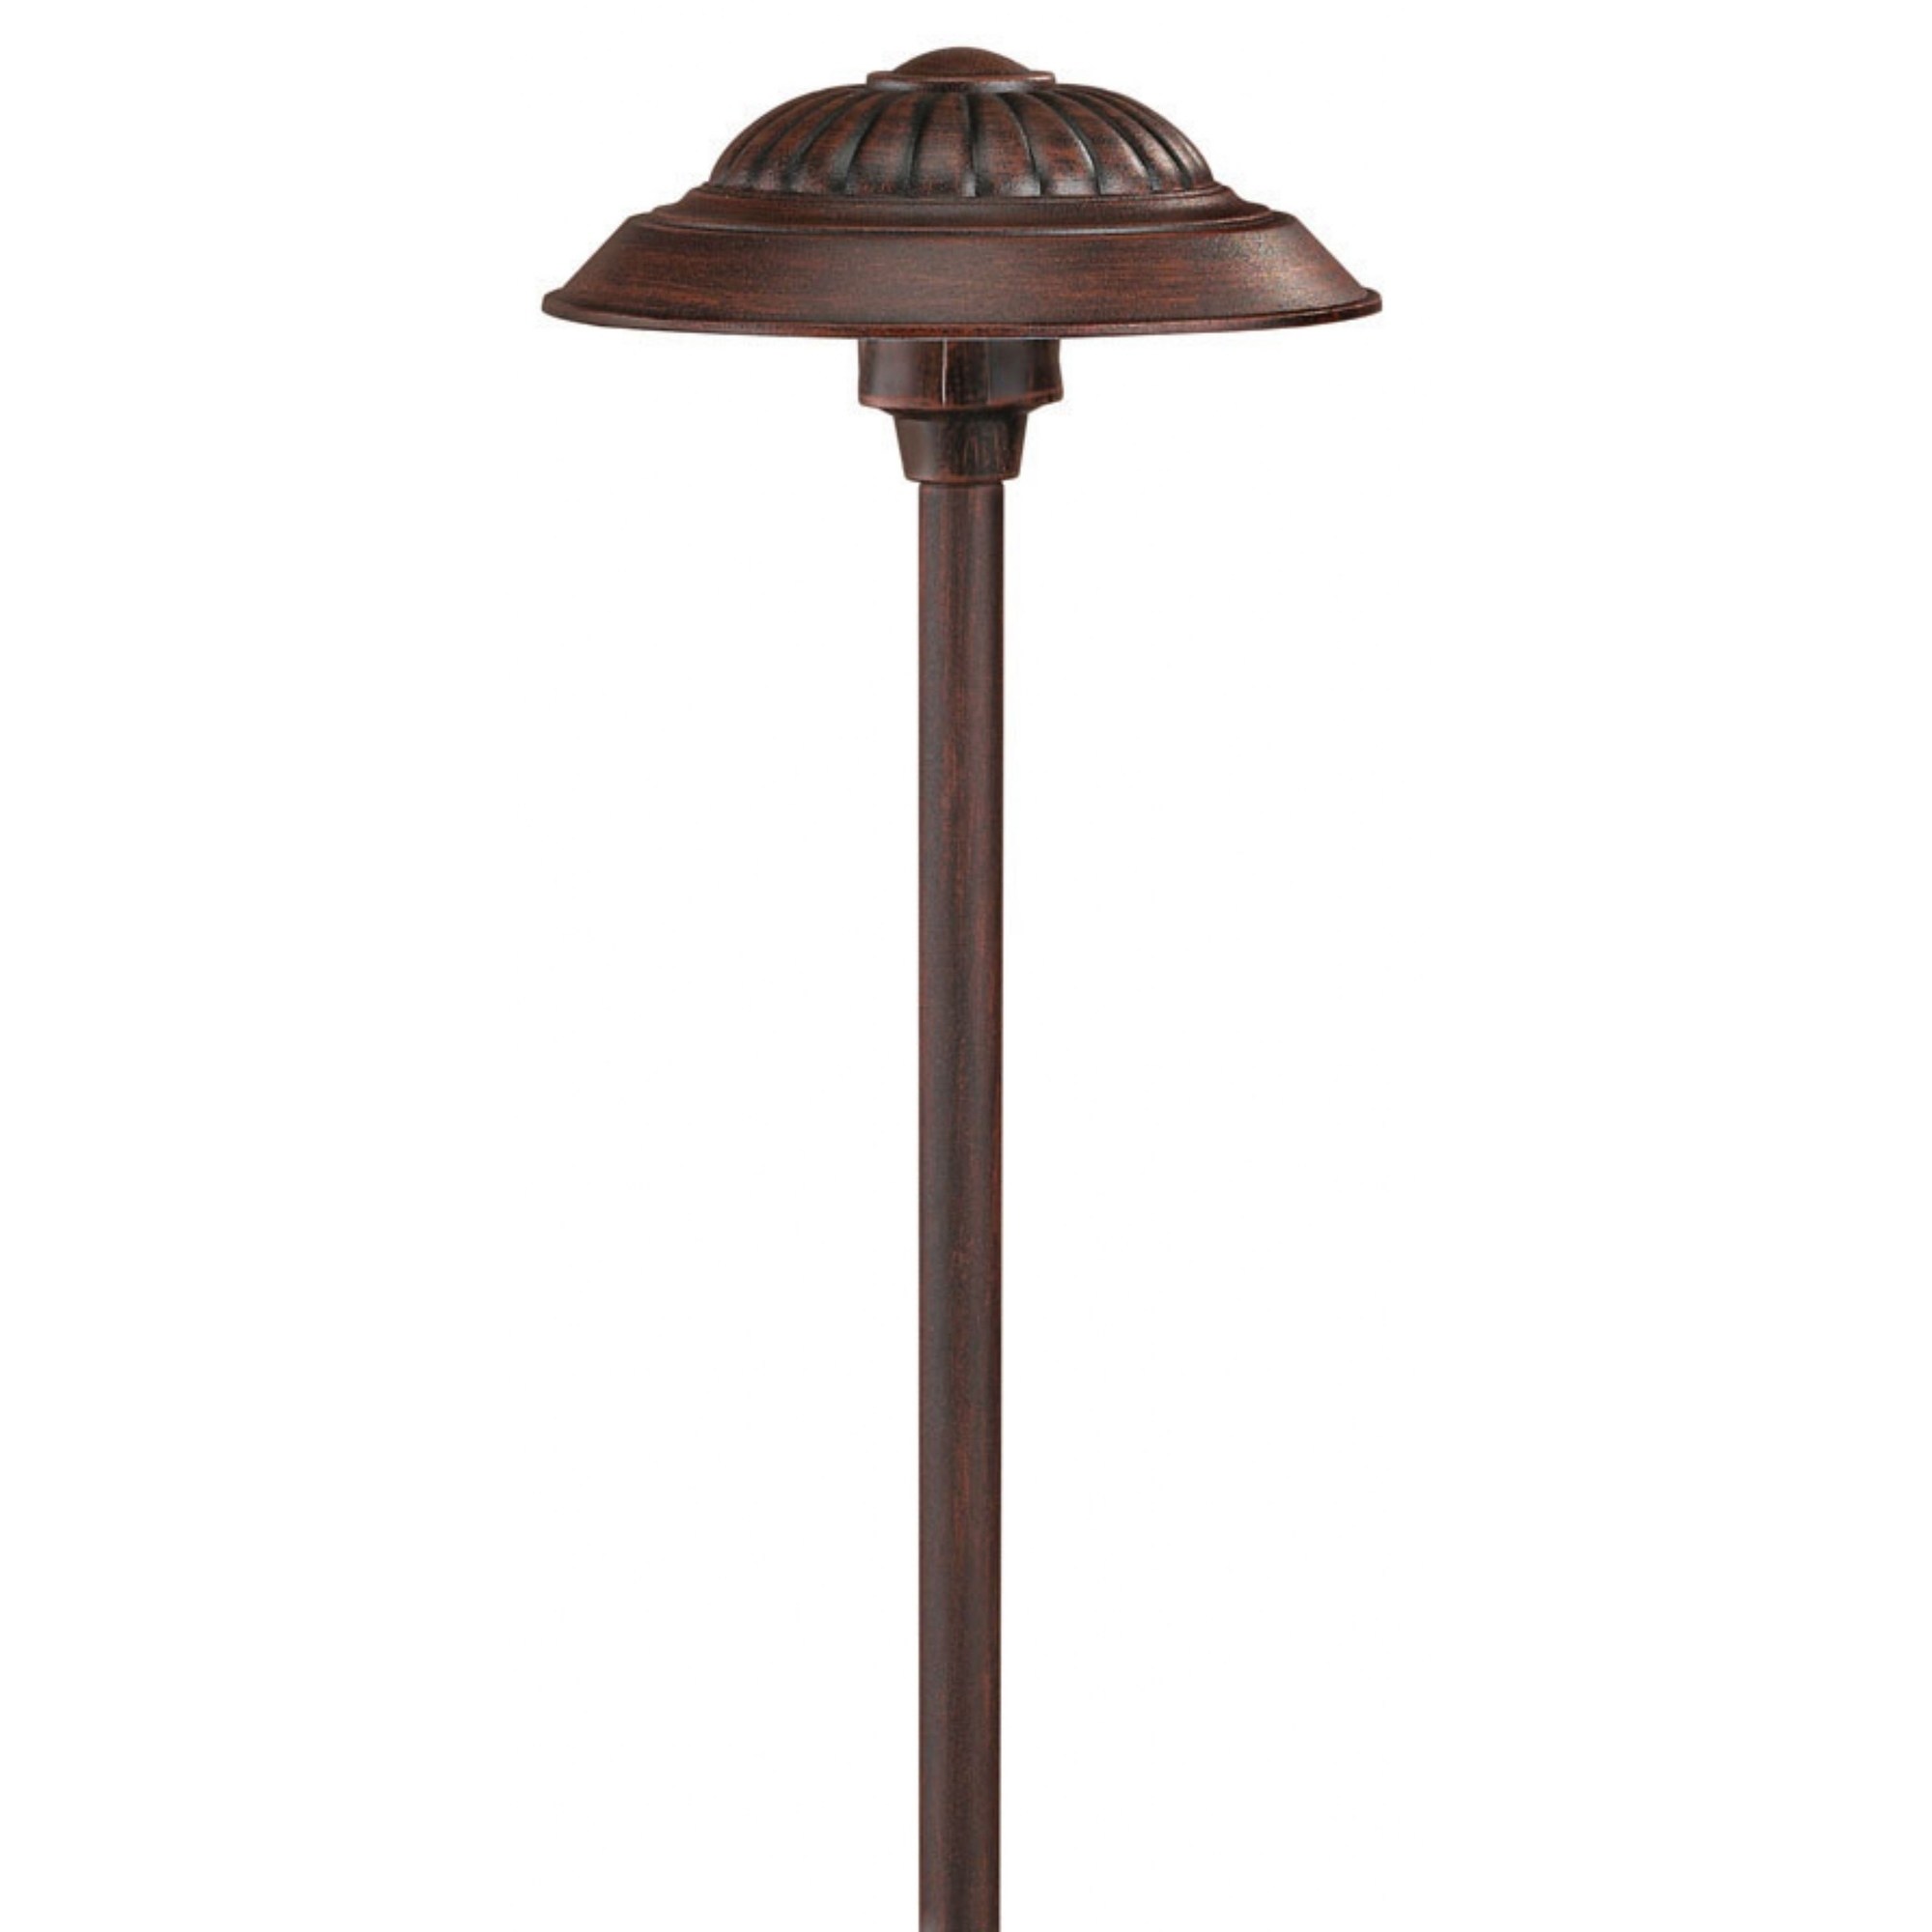 Hinkley Lighting - Saucer - 1 Light Path Light LED Southern Clay Finish - - image 2 of 2